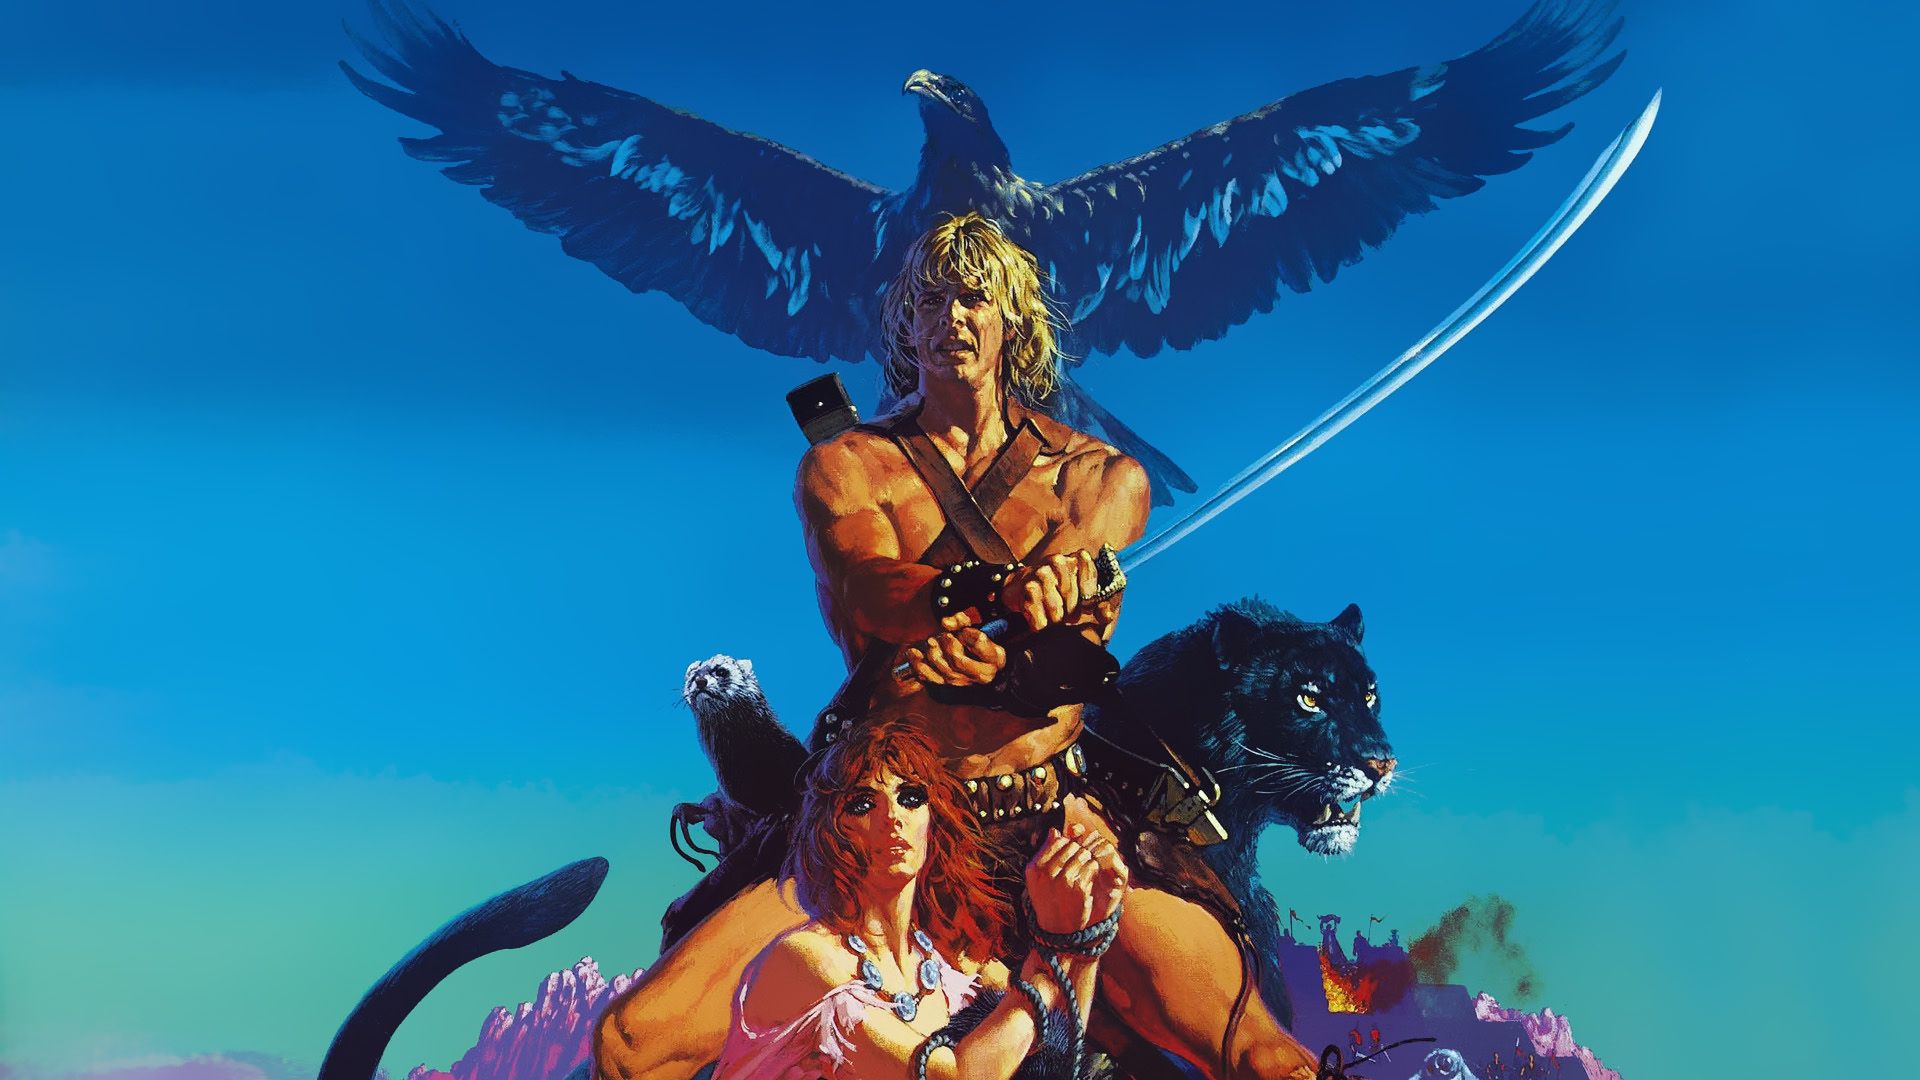 The Beastmaster background